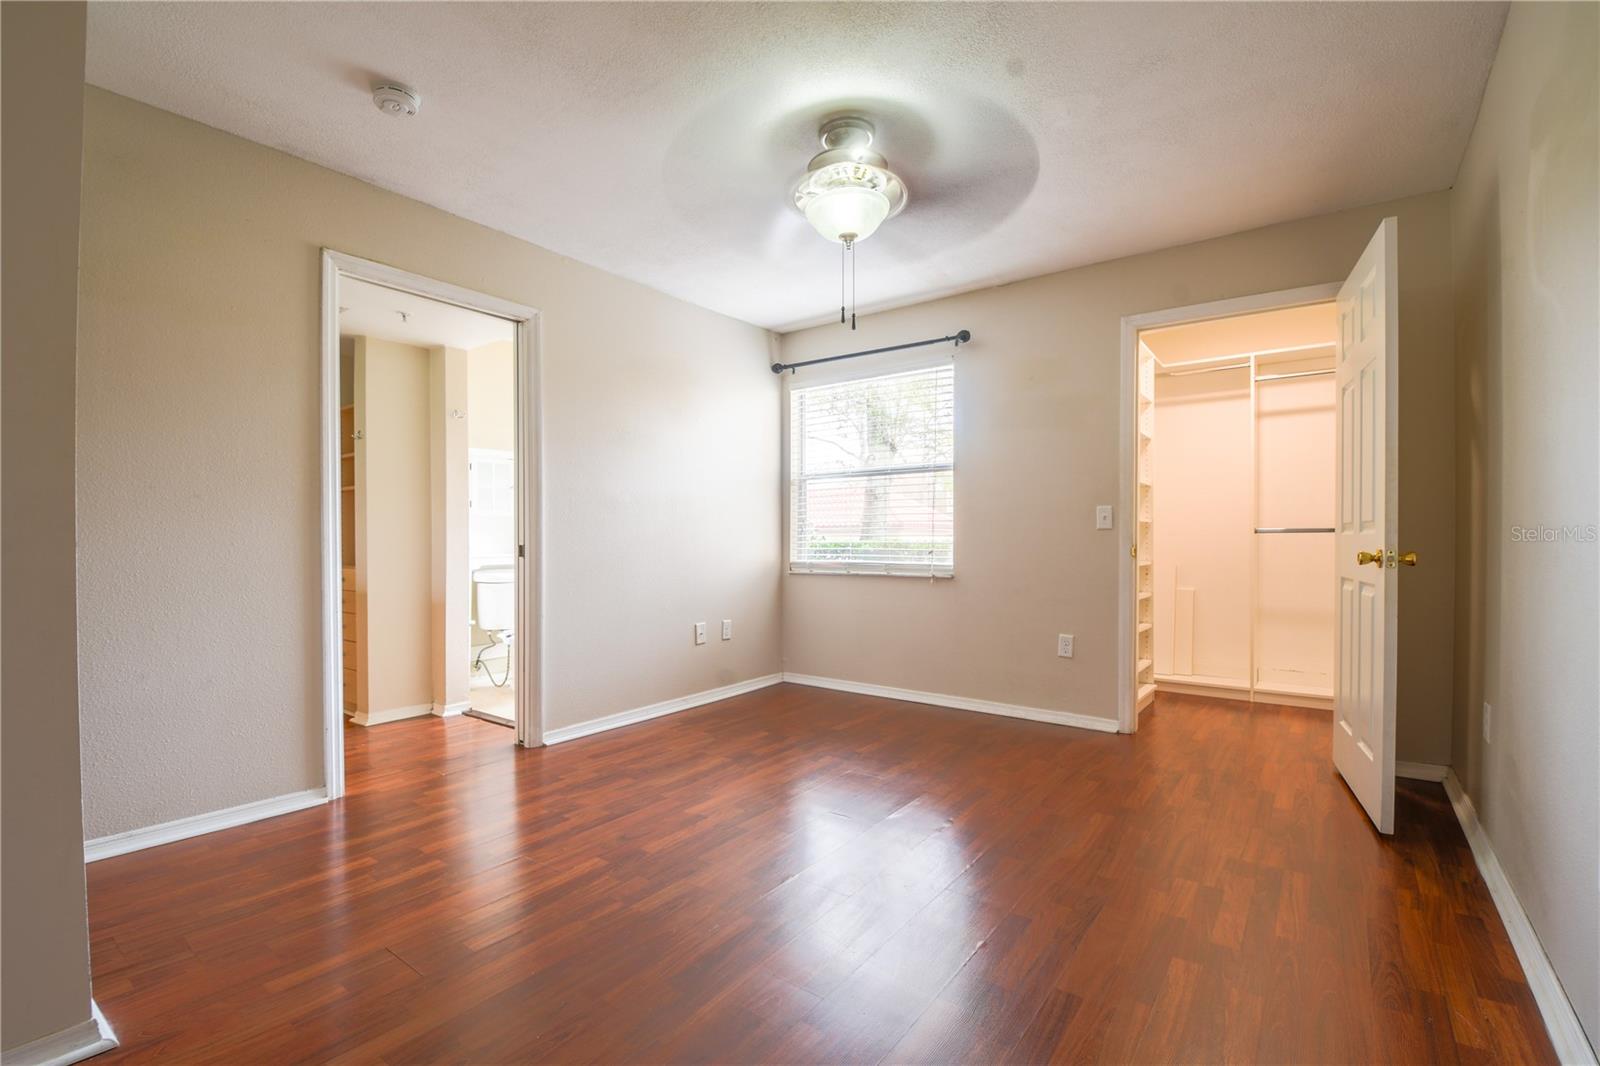 The primary bedroom features wood laminate flooring, a ceiling fan and ensuite bath.